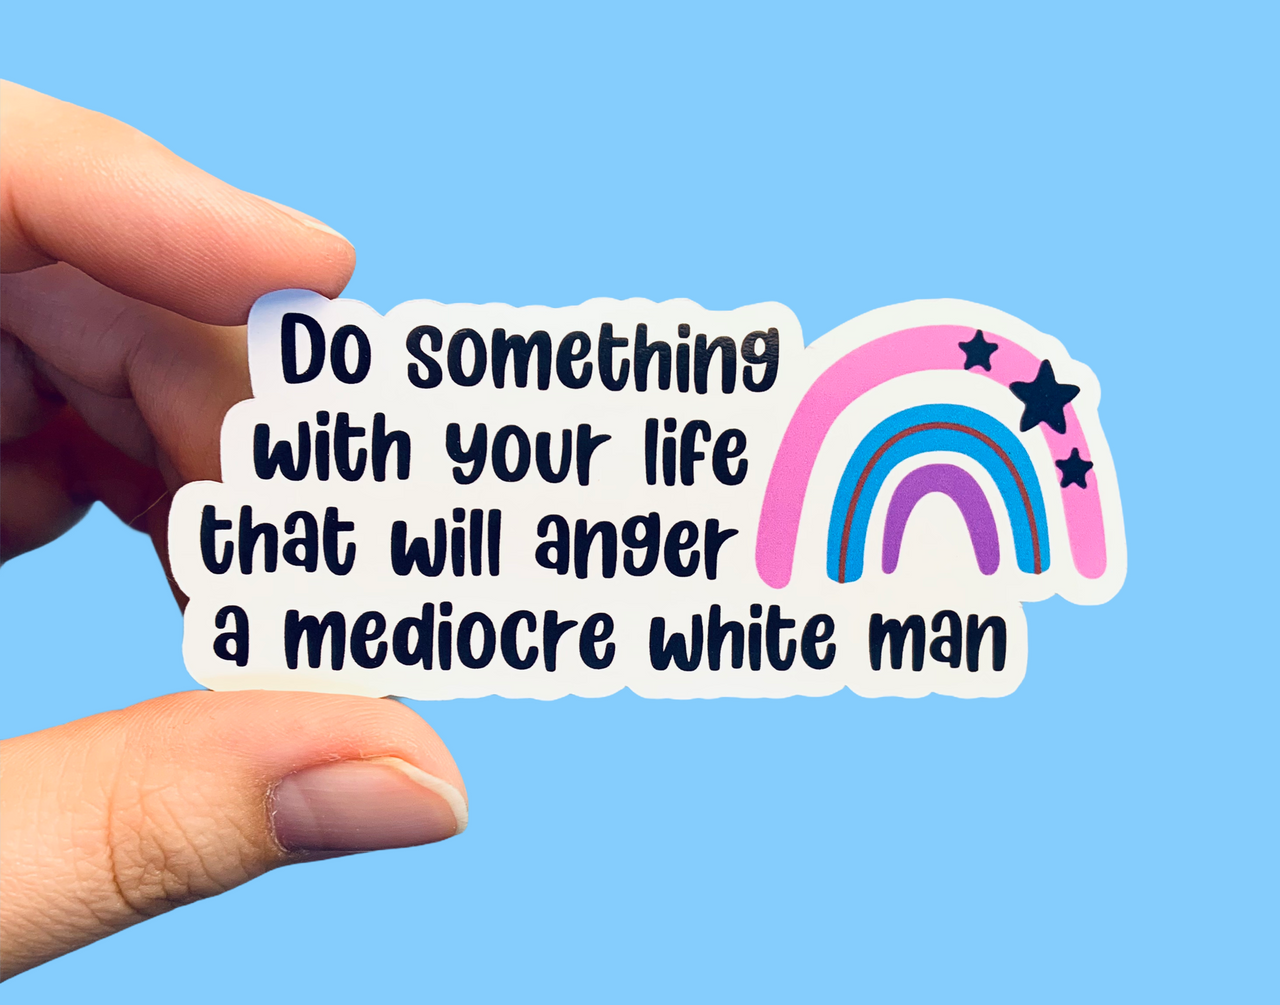 Do something with your life that will anger a mediocre white man (pack of 3 or 5 stickers)